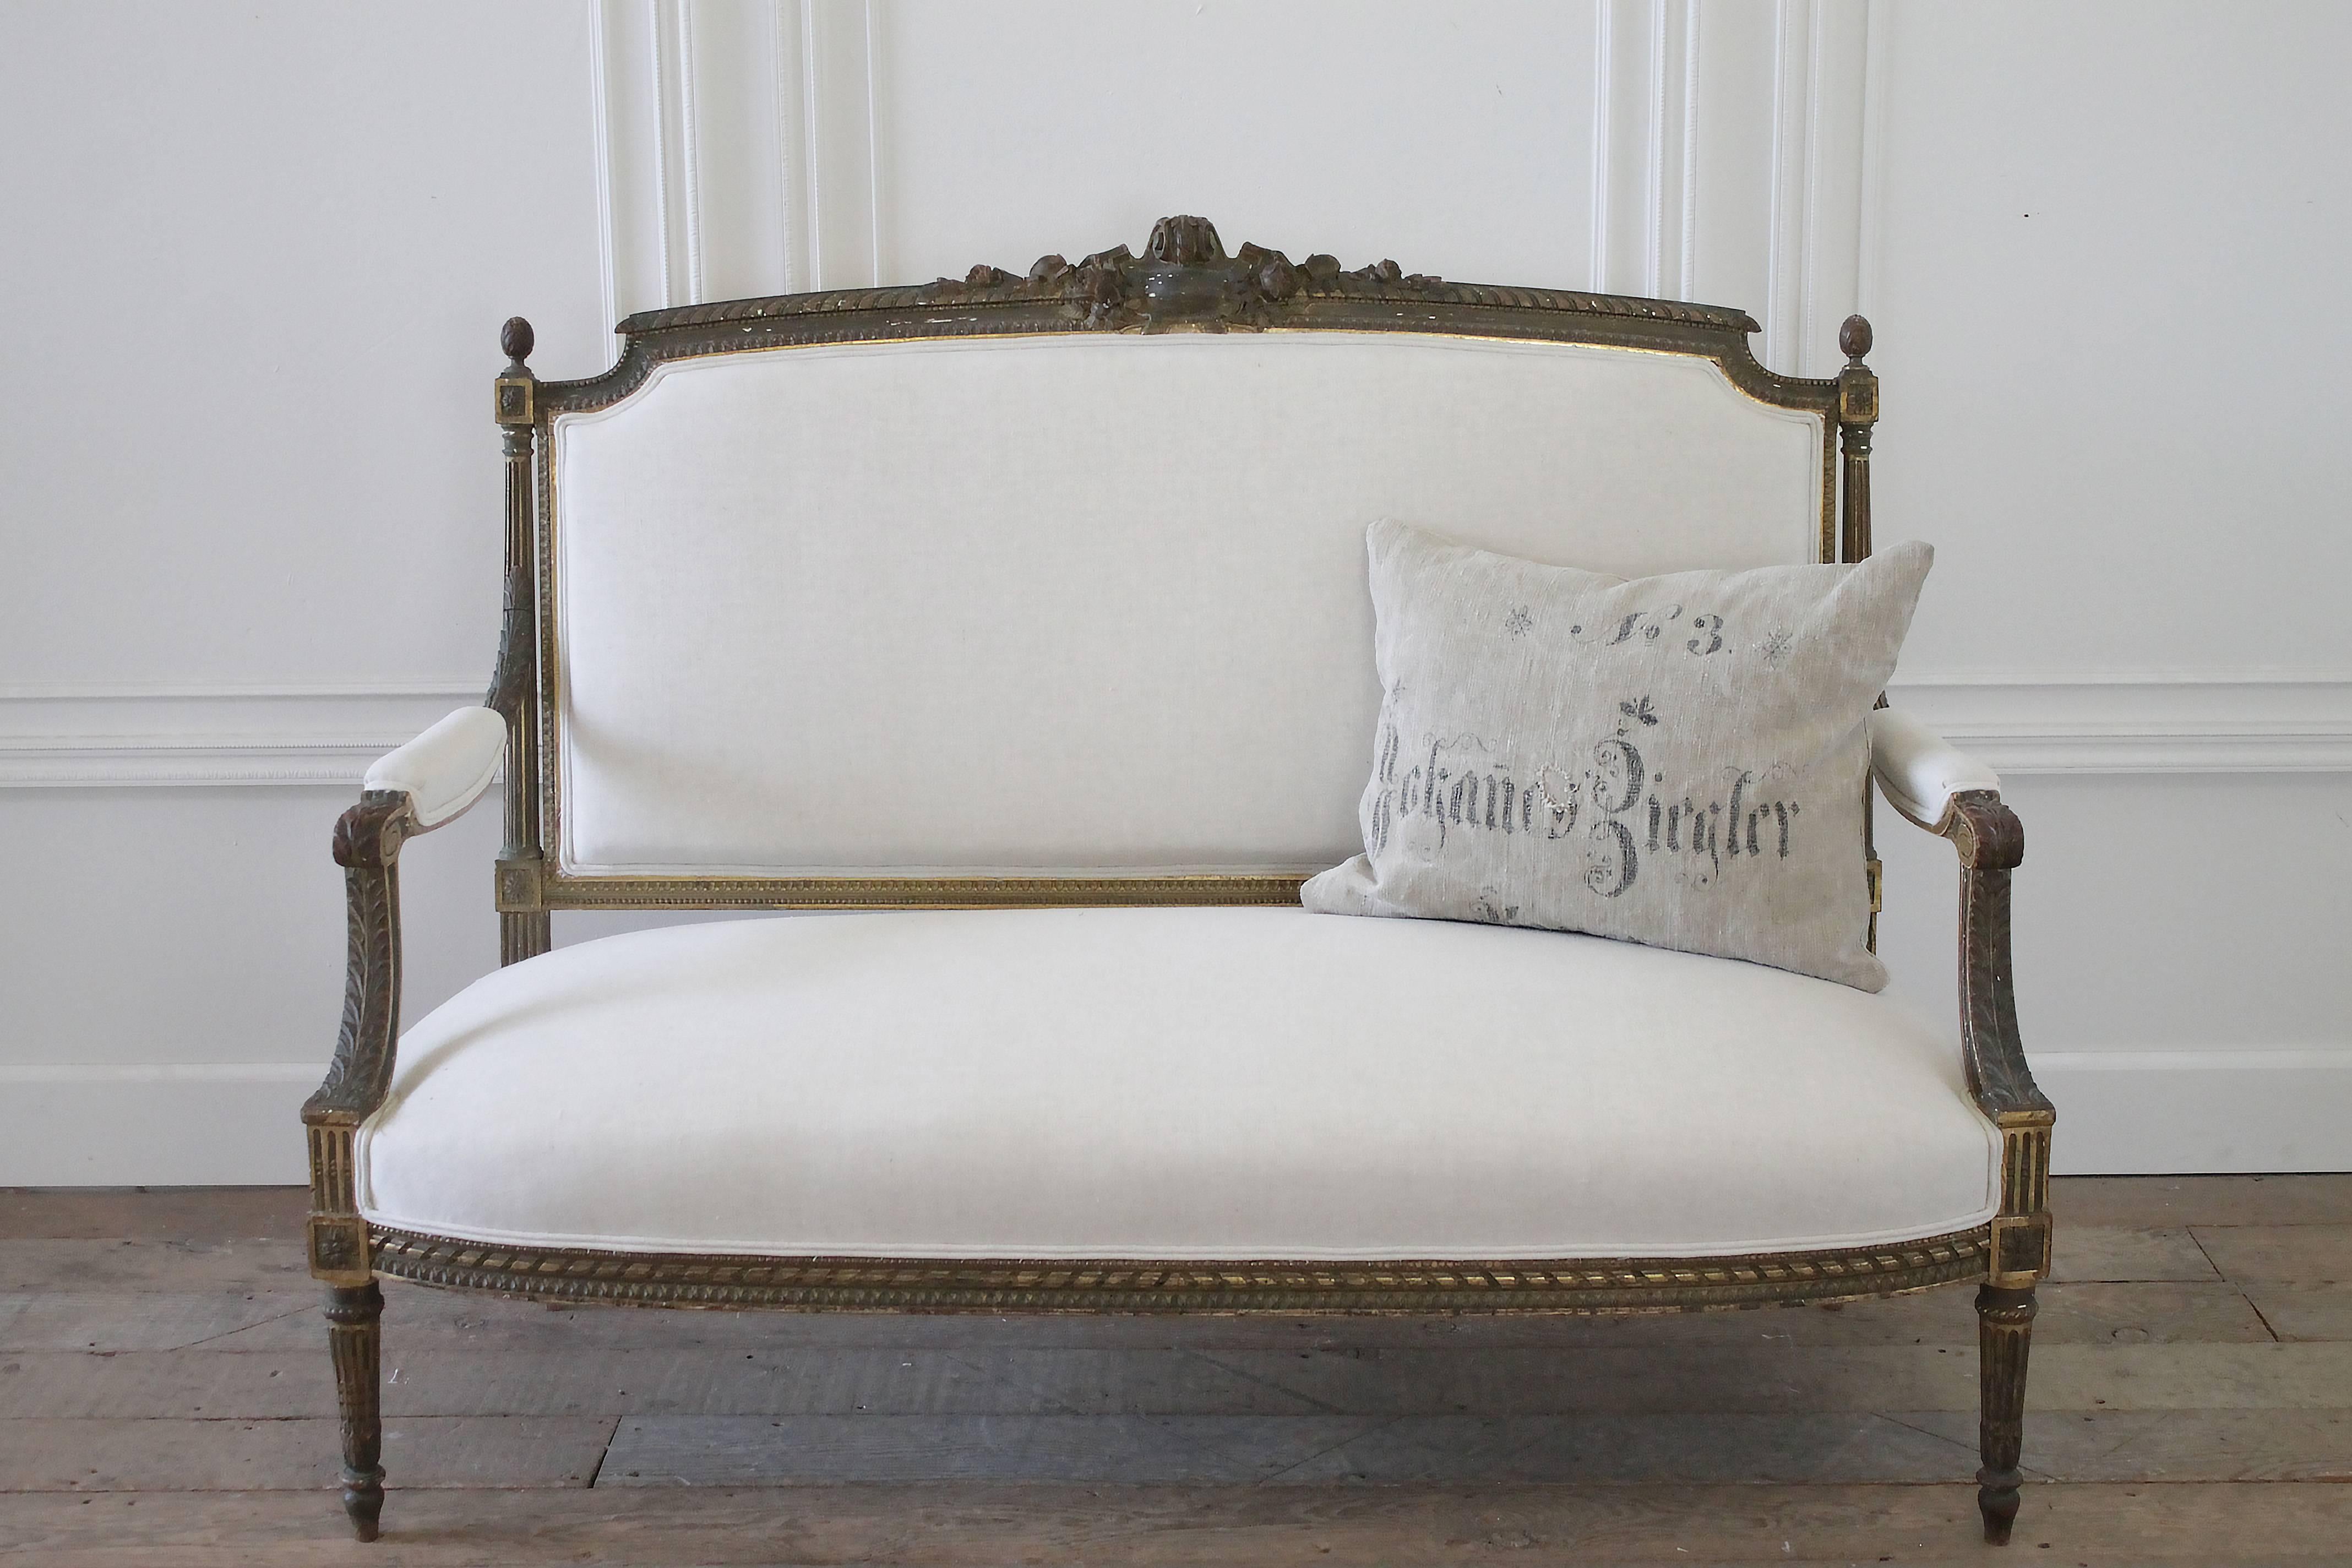 Fabulous settee with original bronze colored gilt finish. A large carved medallion with roses and ribbon details rest atop the back, with small fluted arms and acorn finial. Classic Louis XVI style settee has been reupholstered in our organic